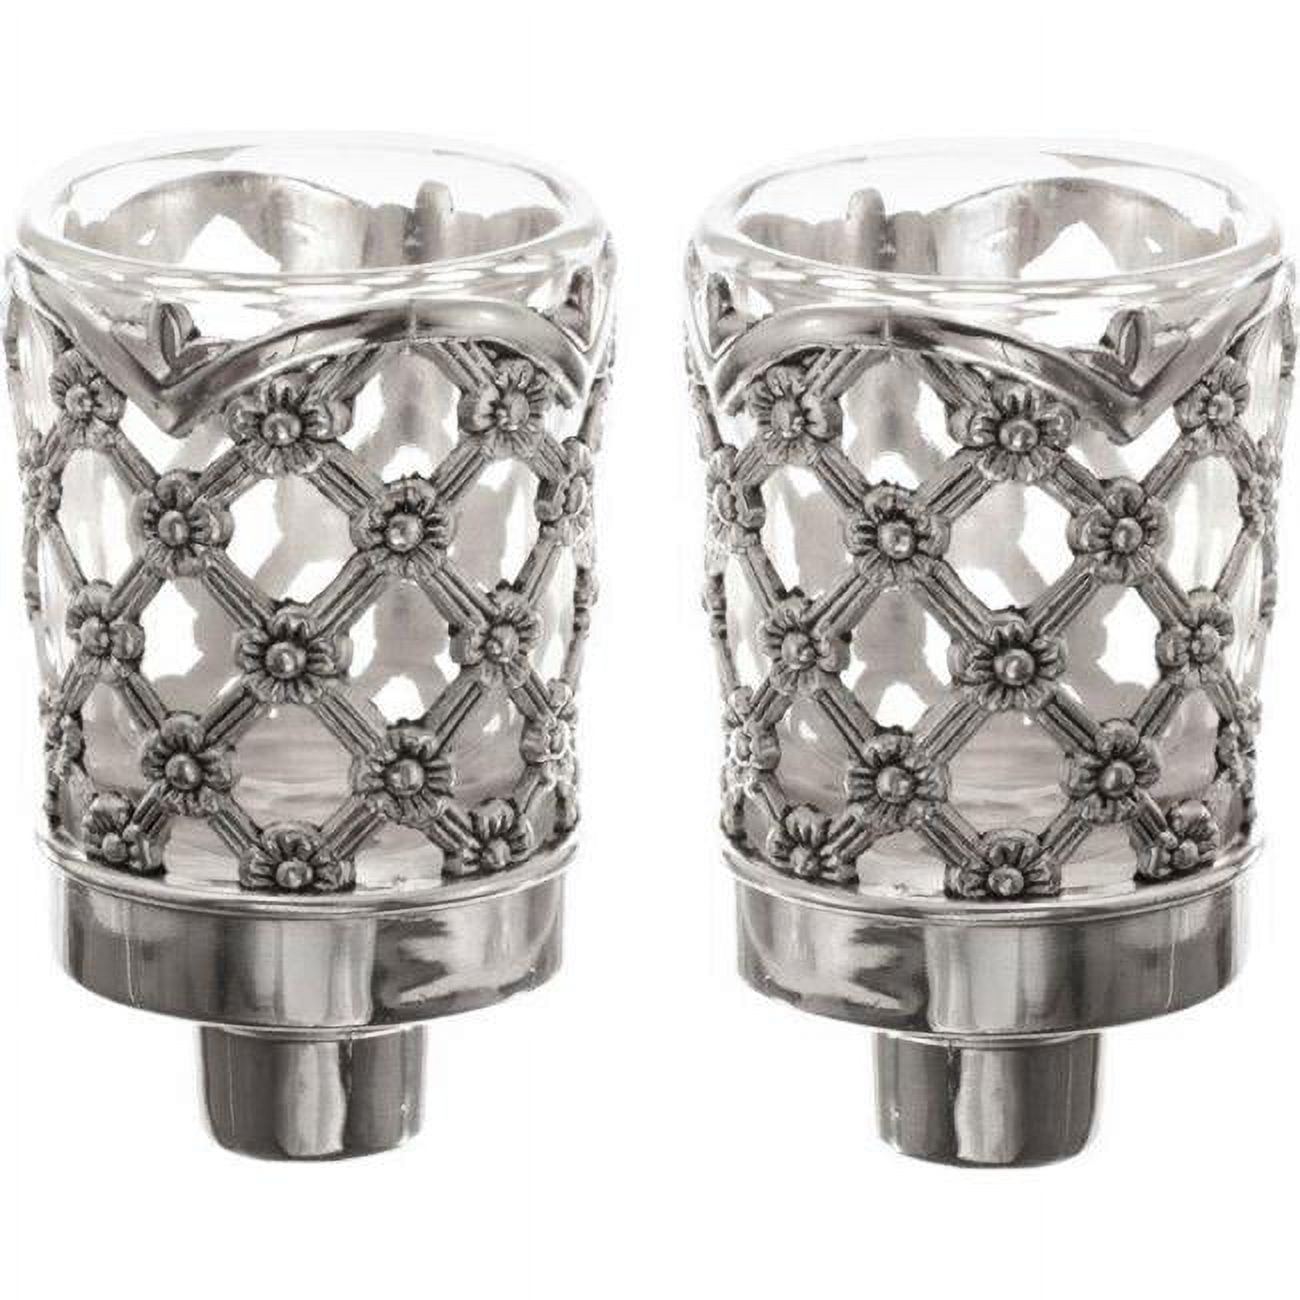 Nua Collection 58130 3 In. Neronim Holder Silver Plated Xp Design